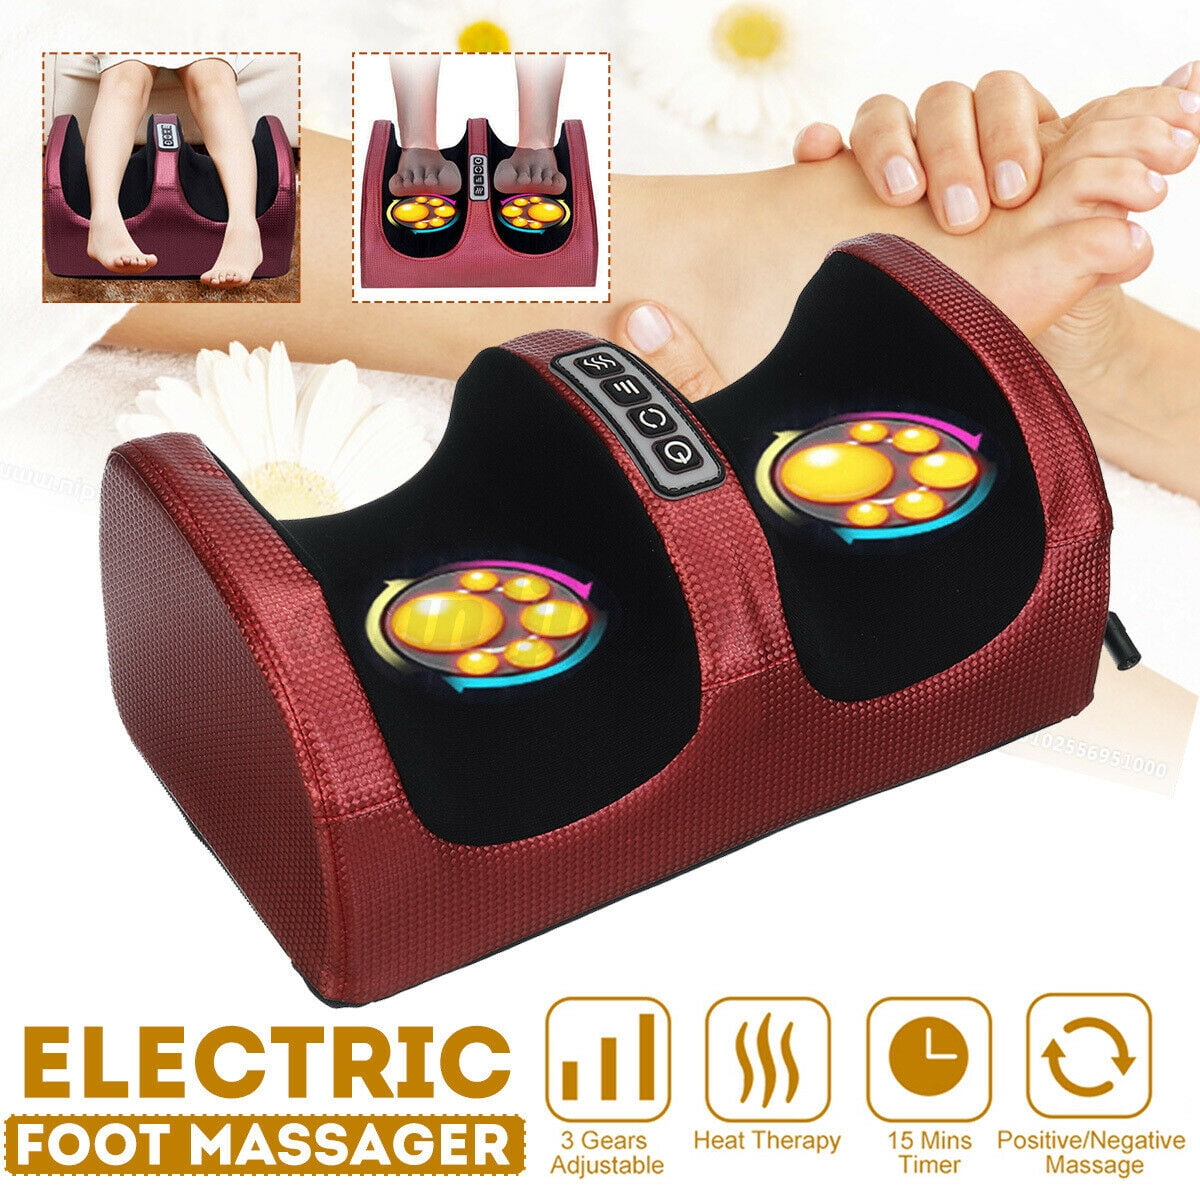 Nekteck Foot Massager with Heat, Shiatsu Heated Electric Kneading Foot  Massager Machine for Plantar Fasciitis, Built-in Infrared Heat Function and